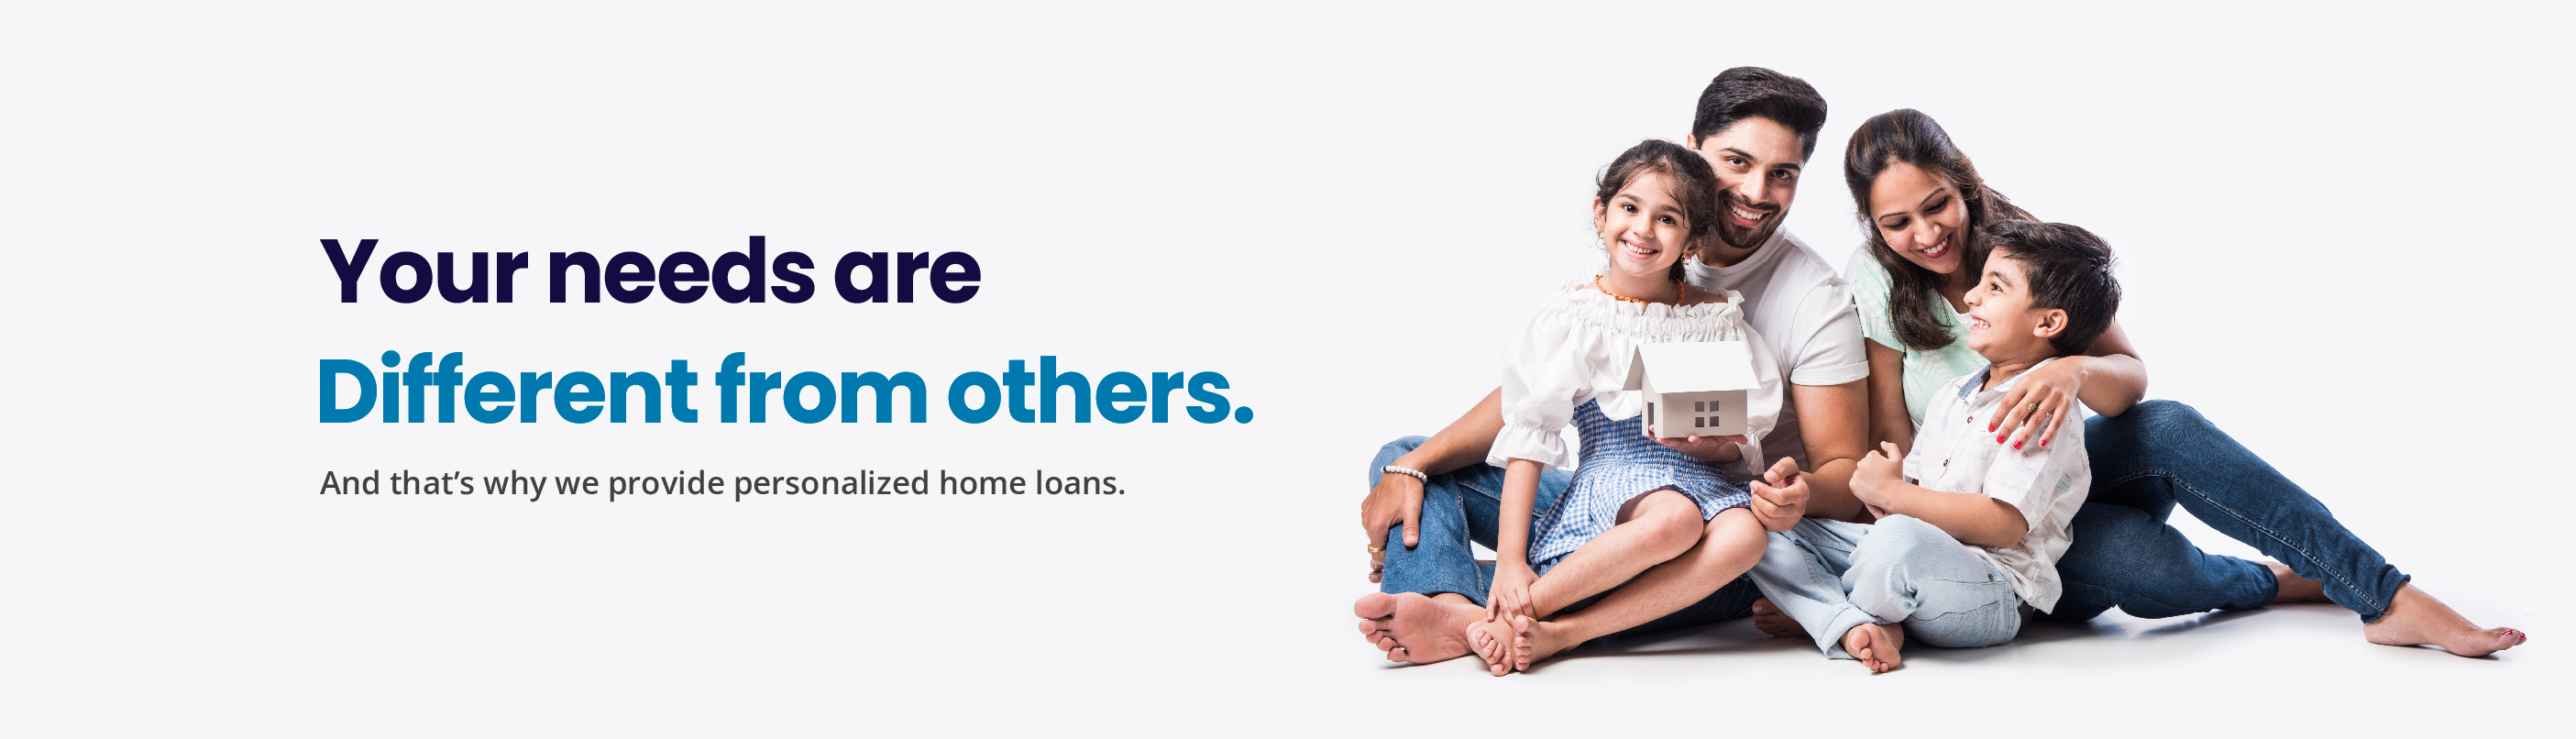 Home Loans - Apply Housing Loan Online - Sundaram Home FinanceServicesInvestment - Financial PlanningAll Indiaother